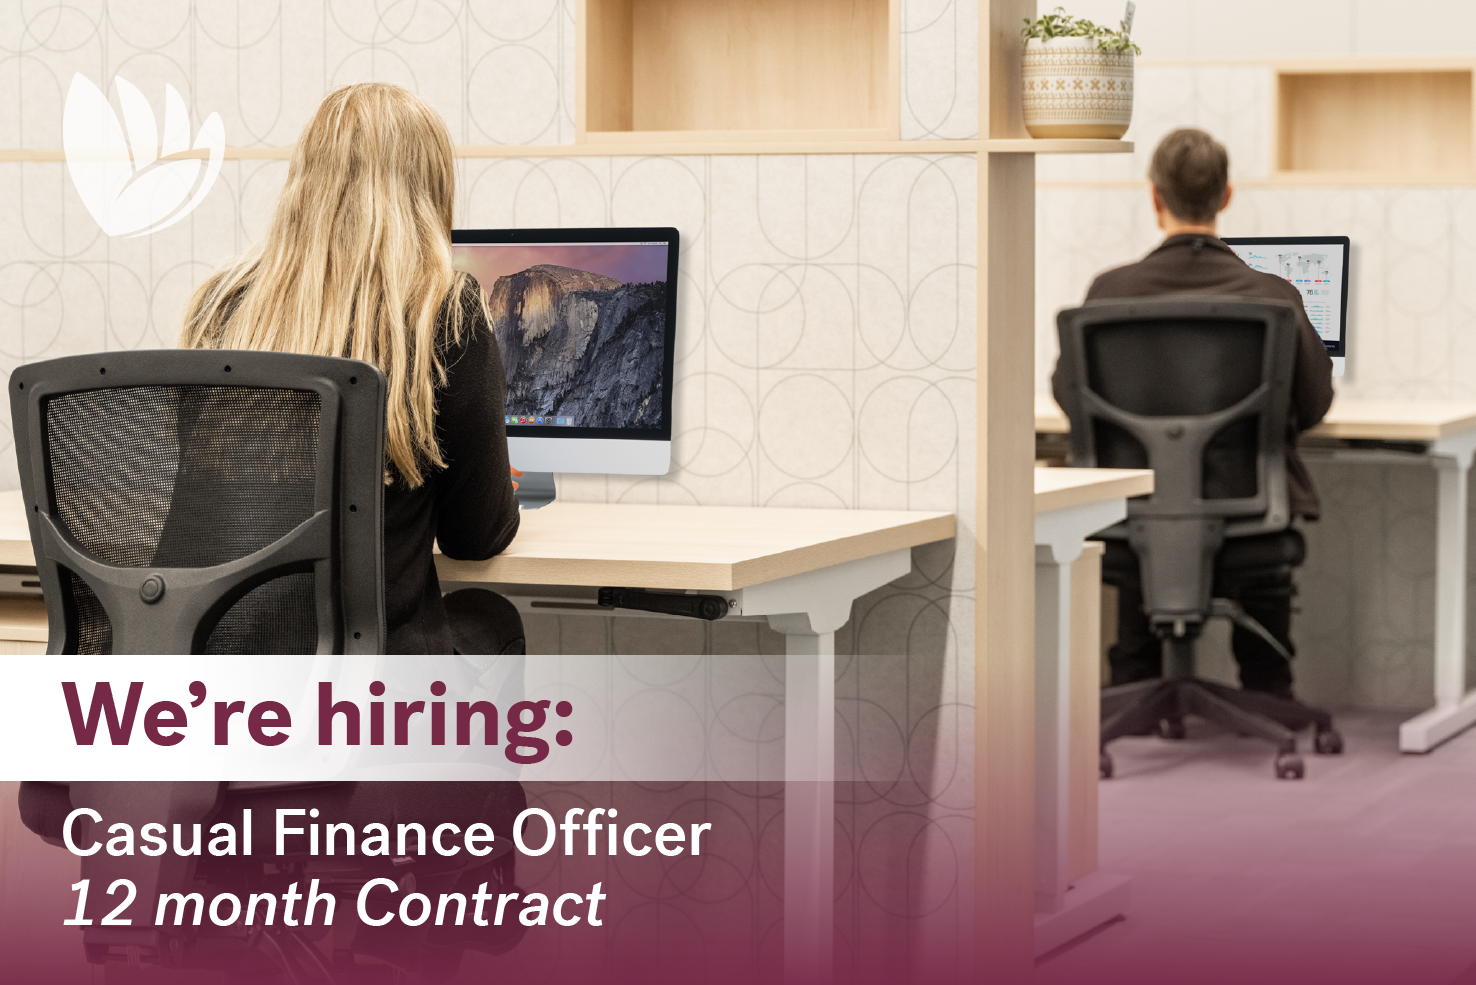 We're Hiring: Casual Finance Officer - 12 month CONTRACT